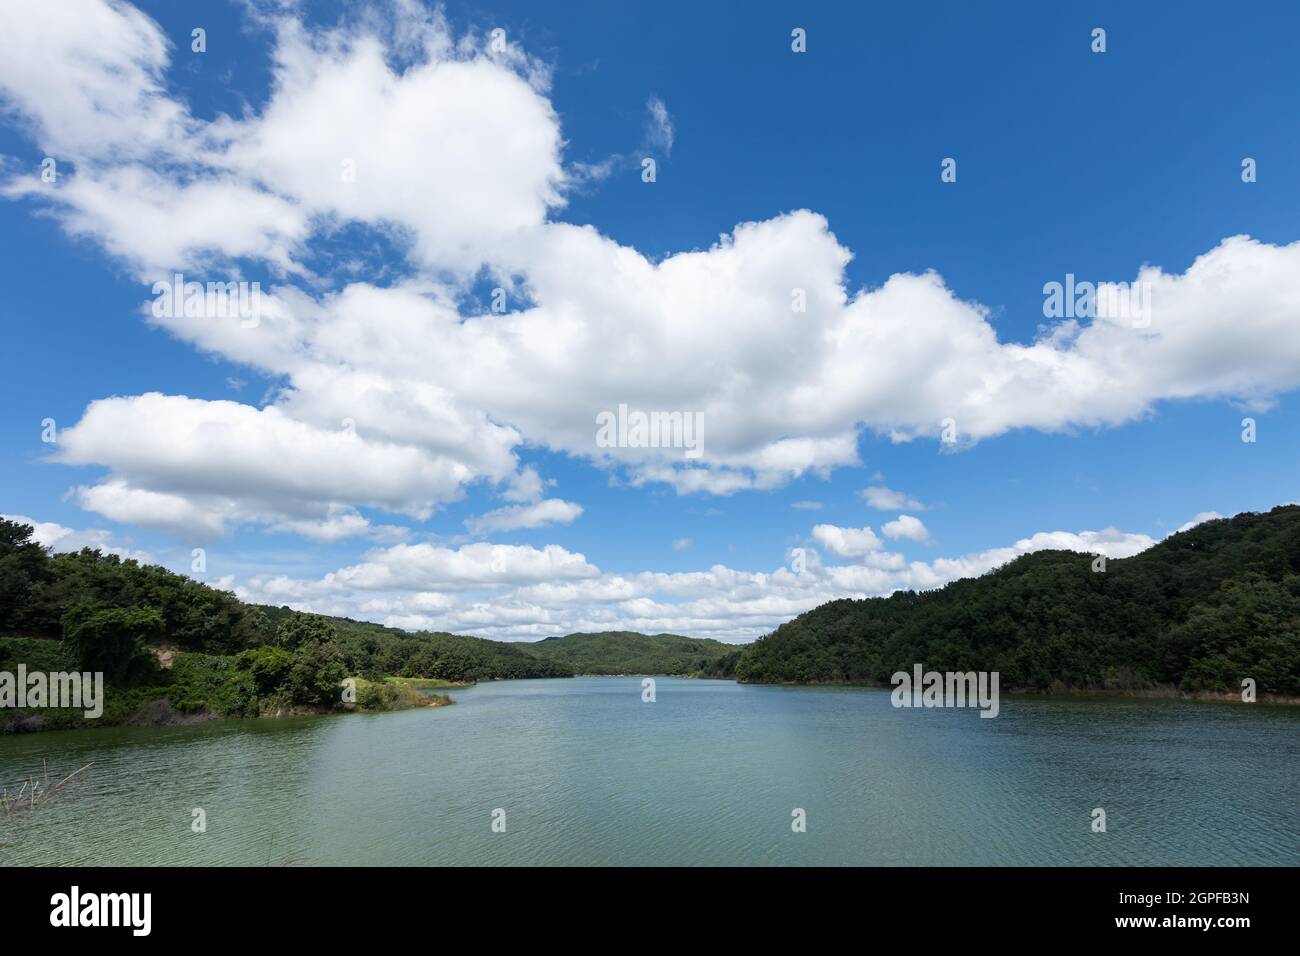 landscape of beautiful blue sky with white clouds, Imdong dam reservoir, Korea Stock Photo